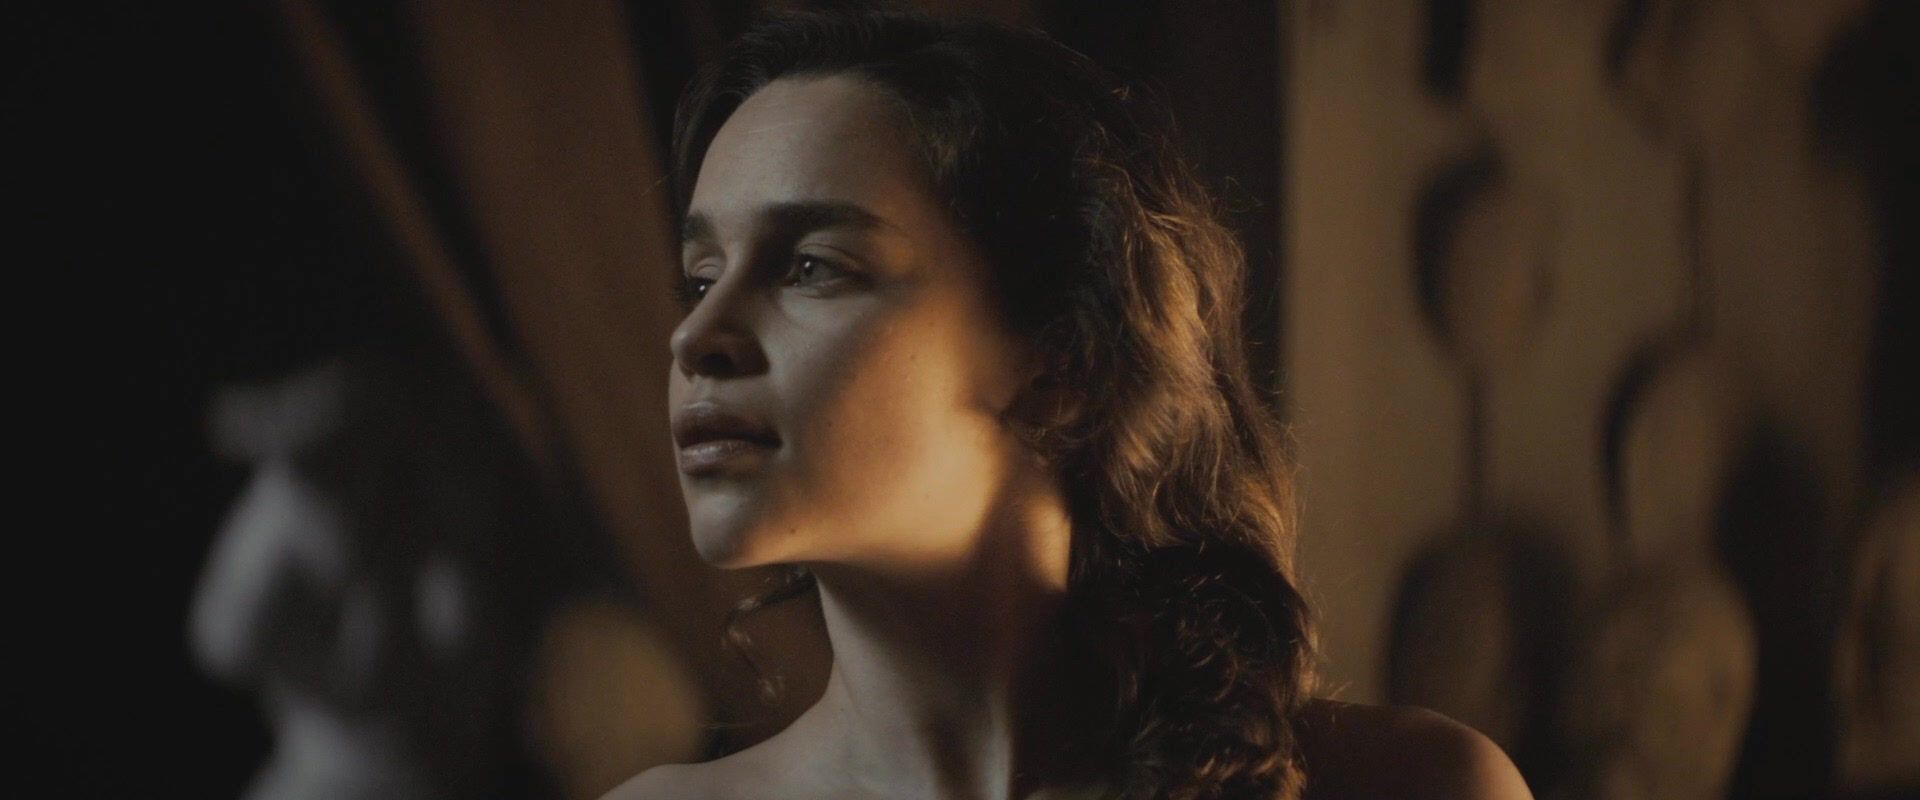 Doggystyle Emilia Clarke nude - Voice from the Stone (2017) OnOff